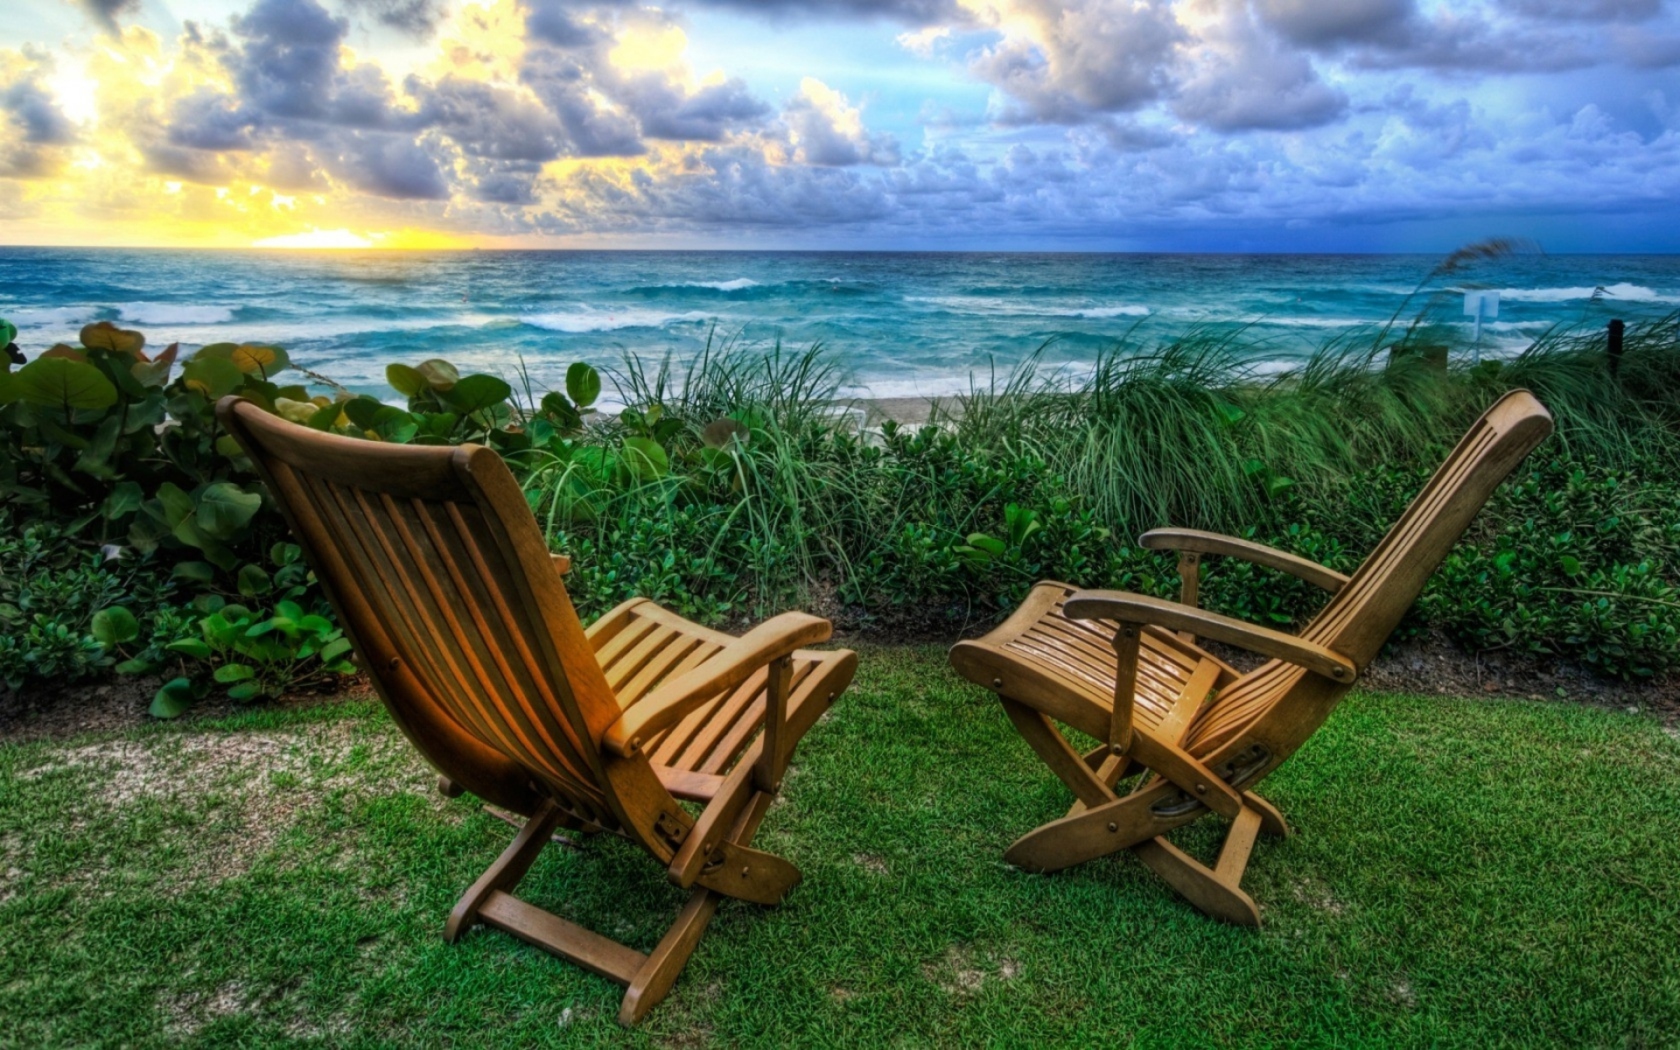 Chairs With Sea View wallpaper 1680x1050